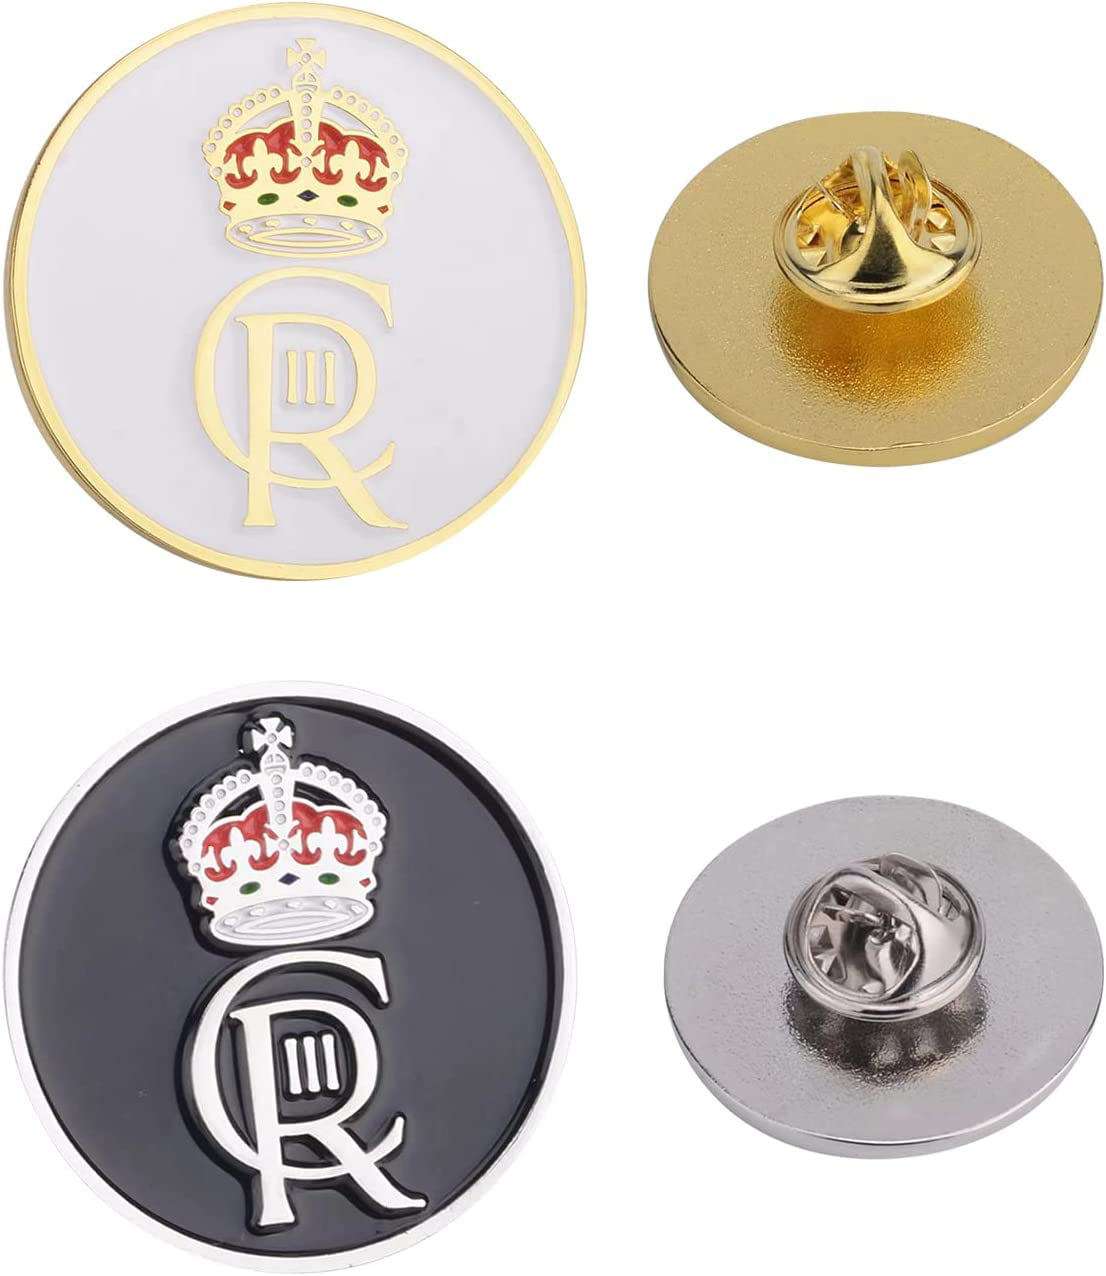 King Charles Jacket Silver Buttons set of 5 - Masonic Supply Shop